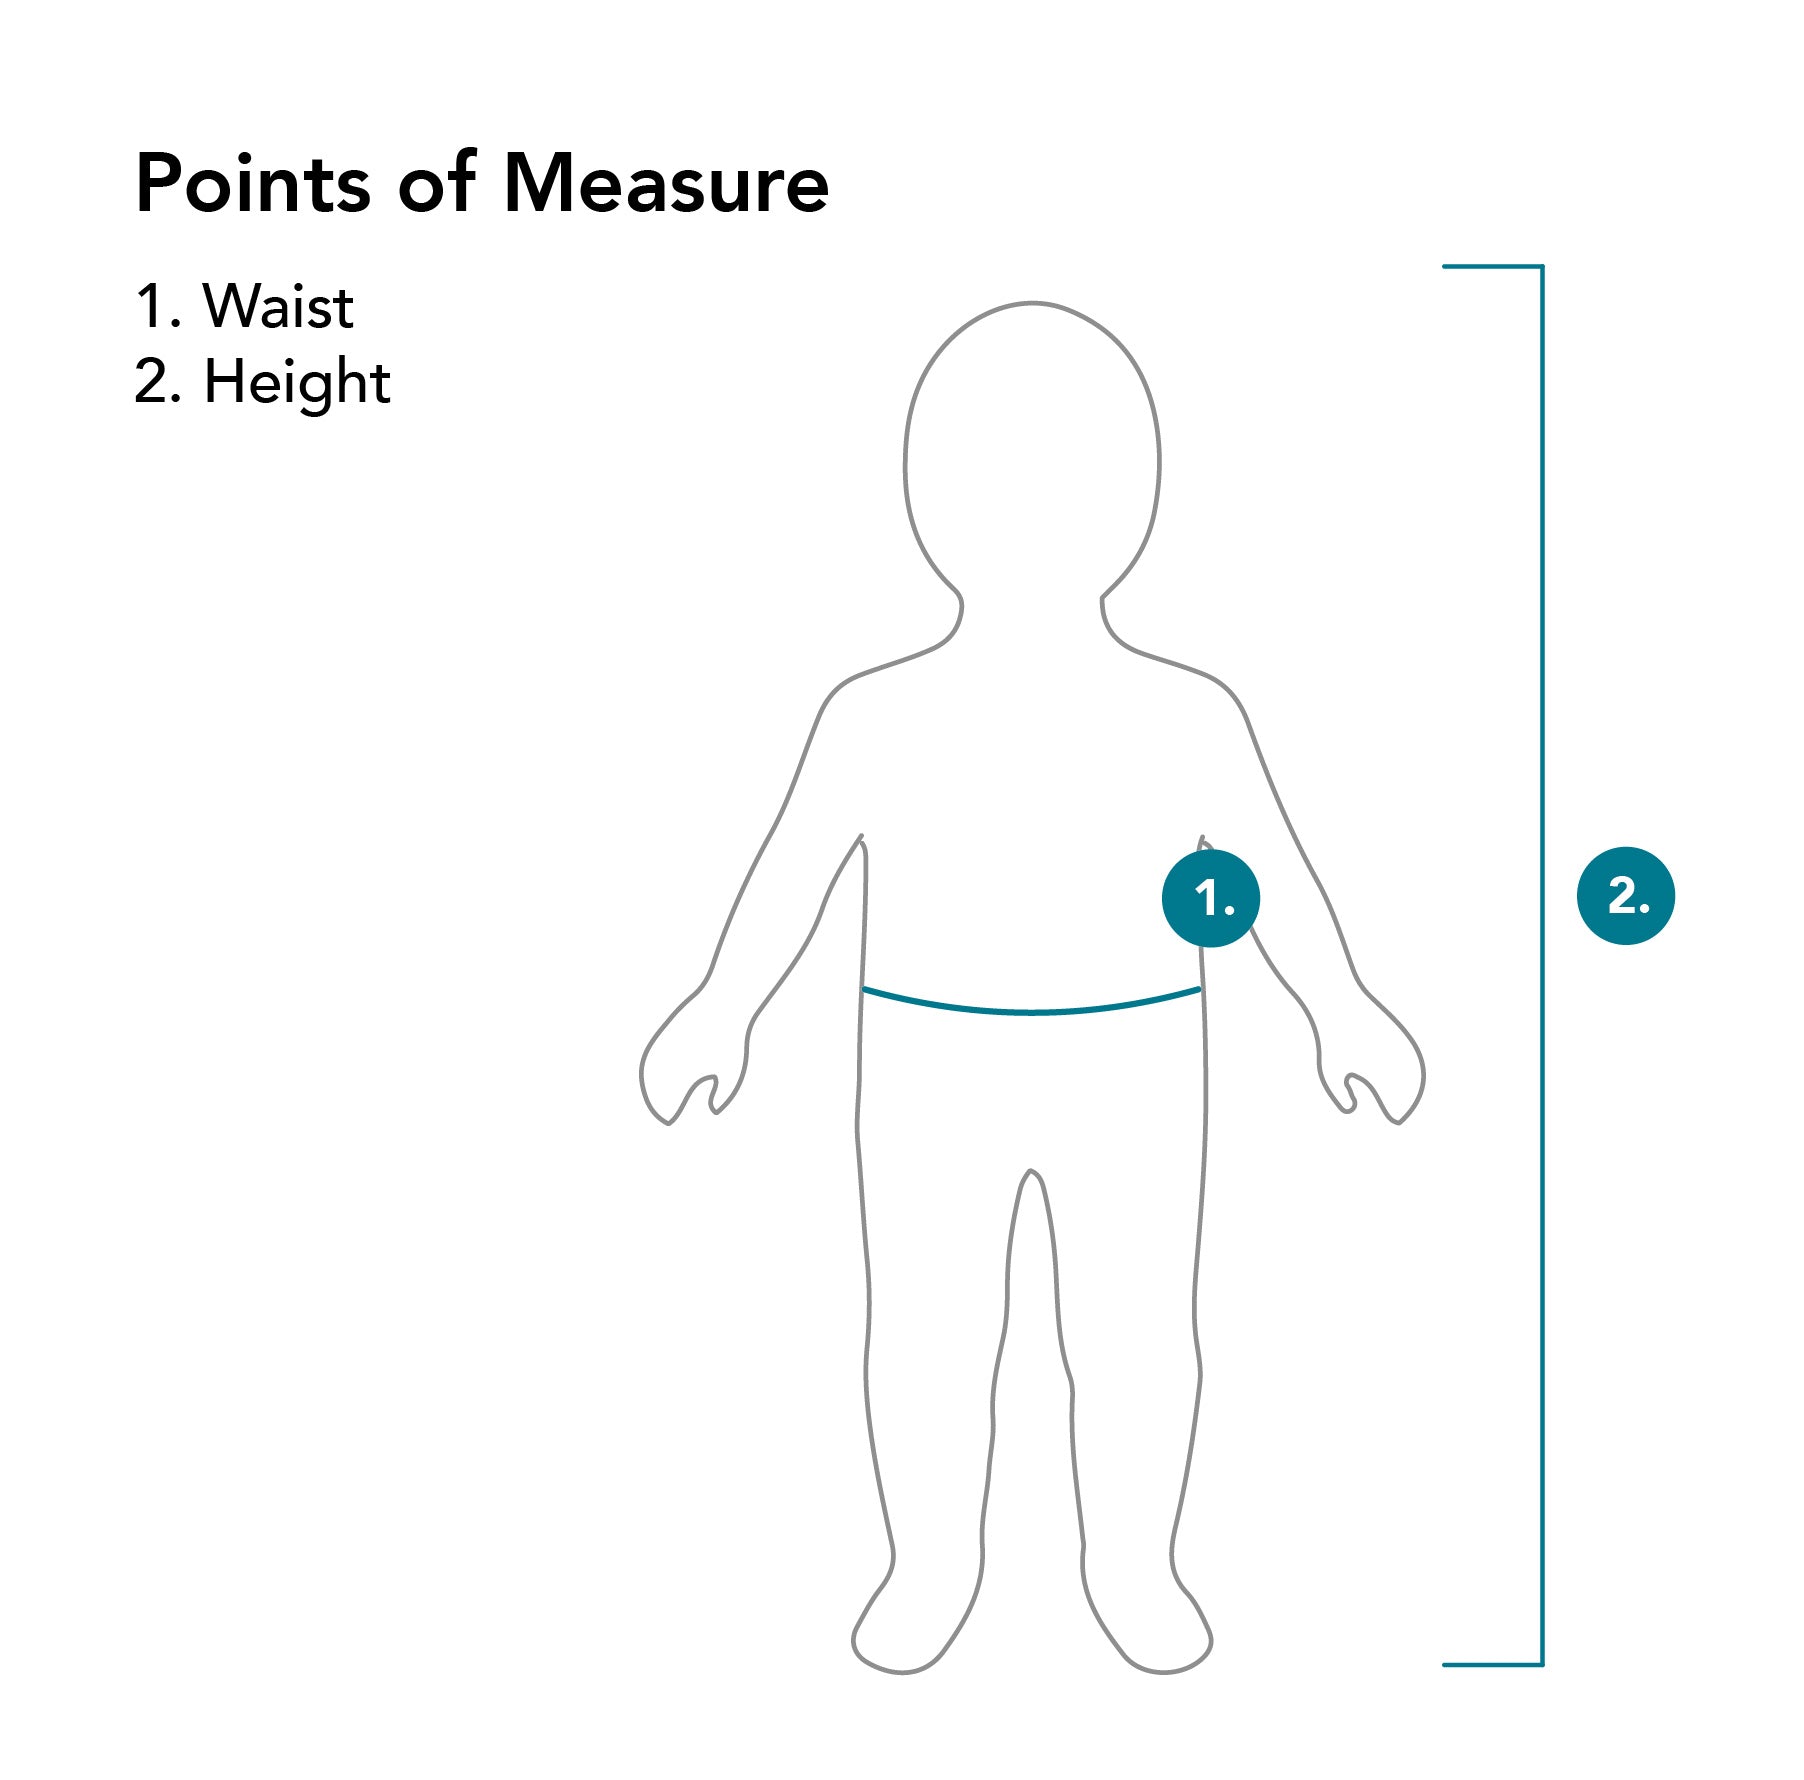 Points of Measure Waist and Height